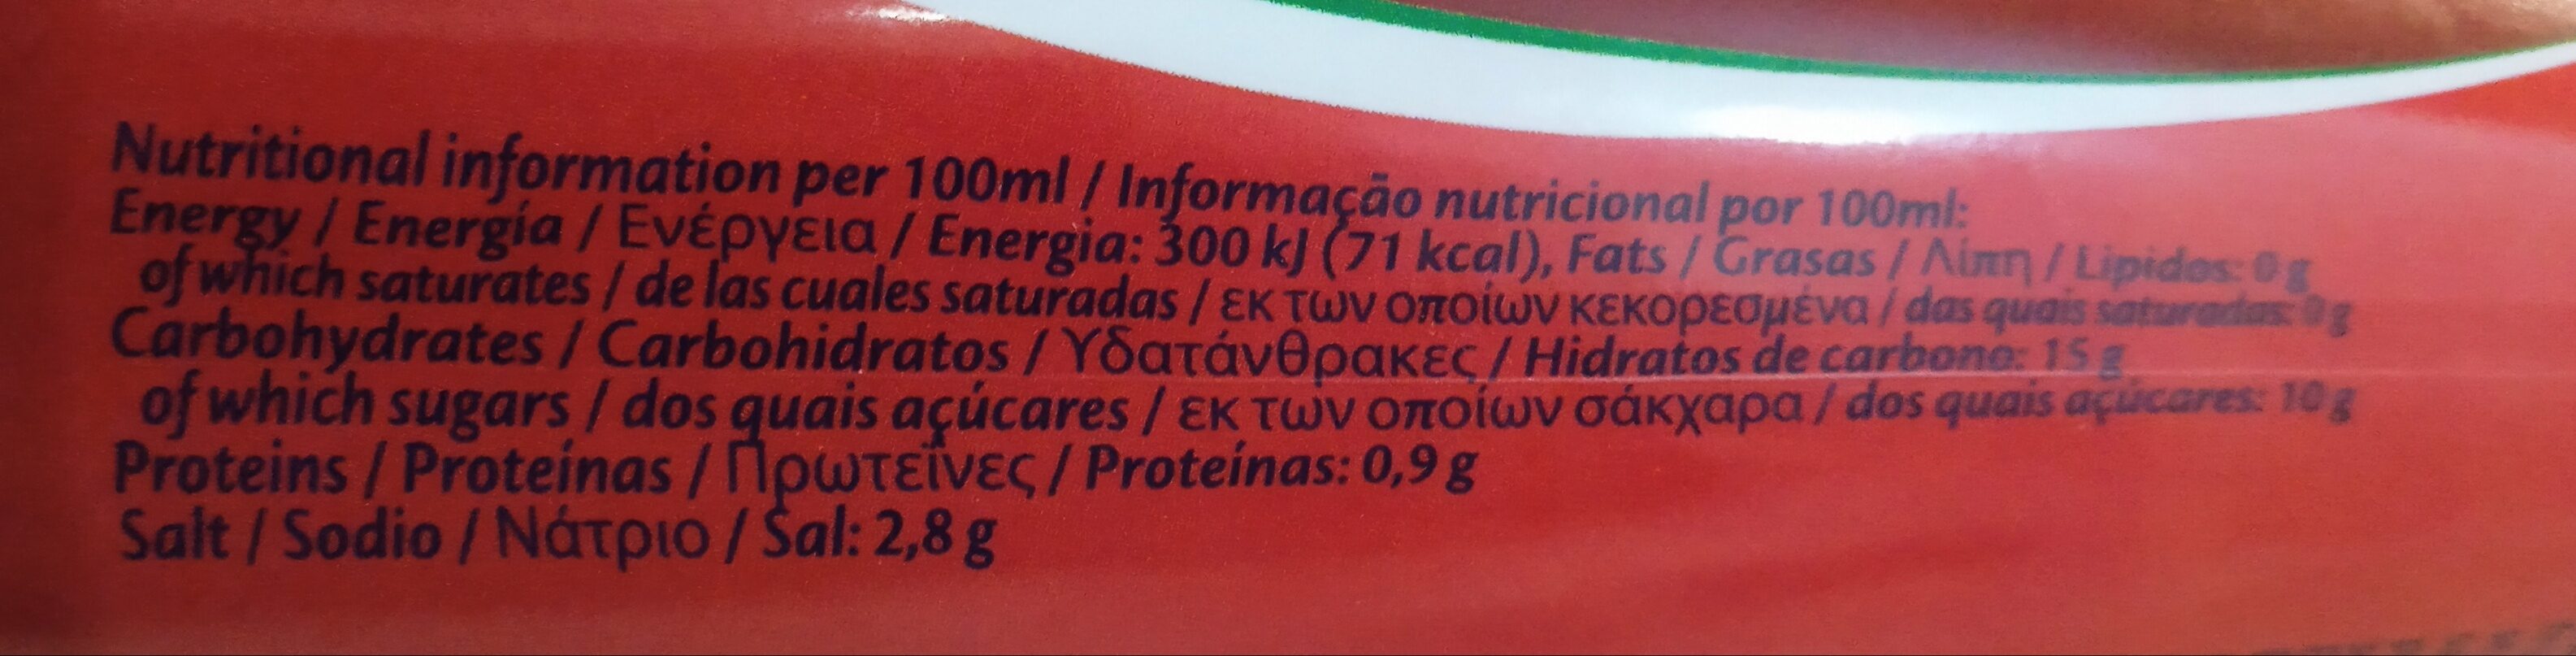 Tomato ketchup - Nutrition facts - fr